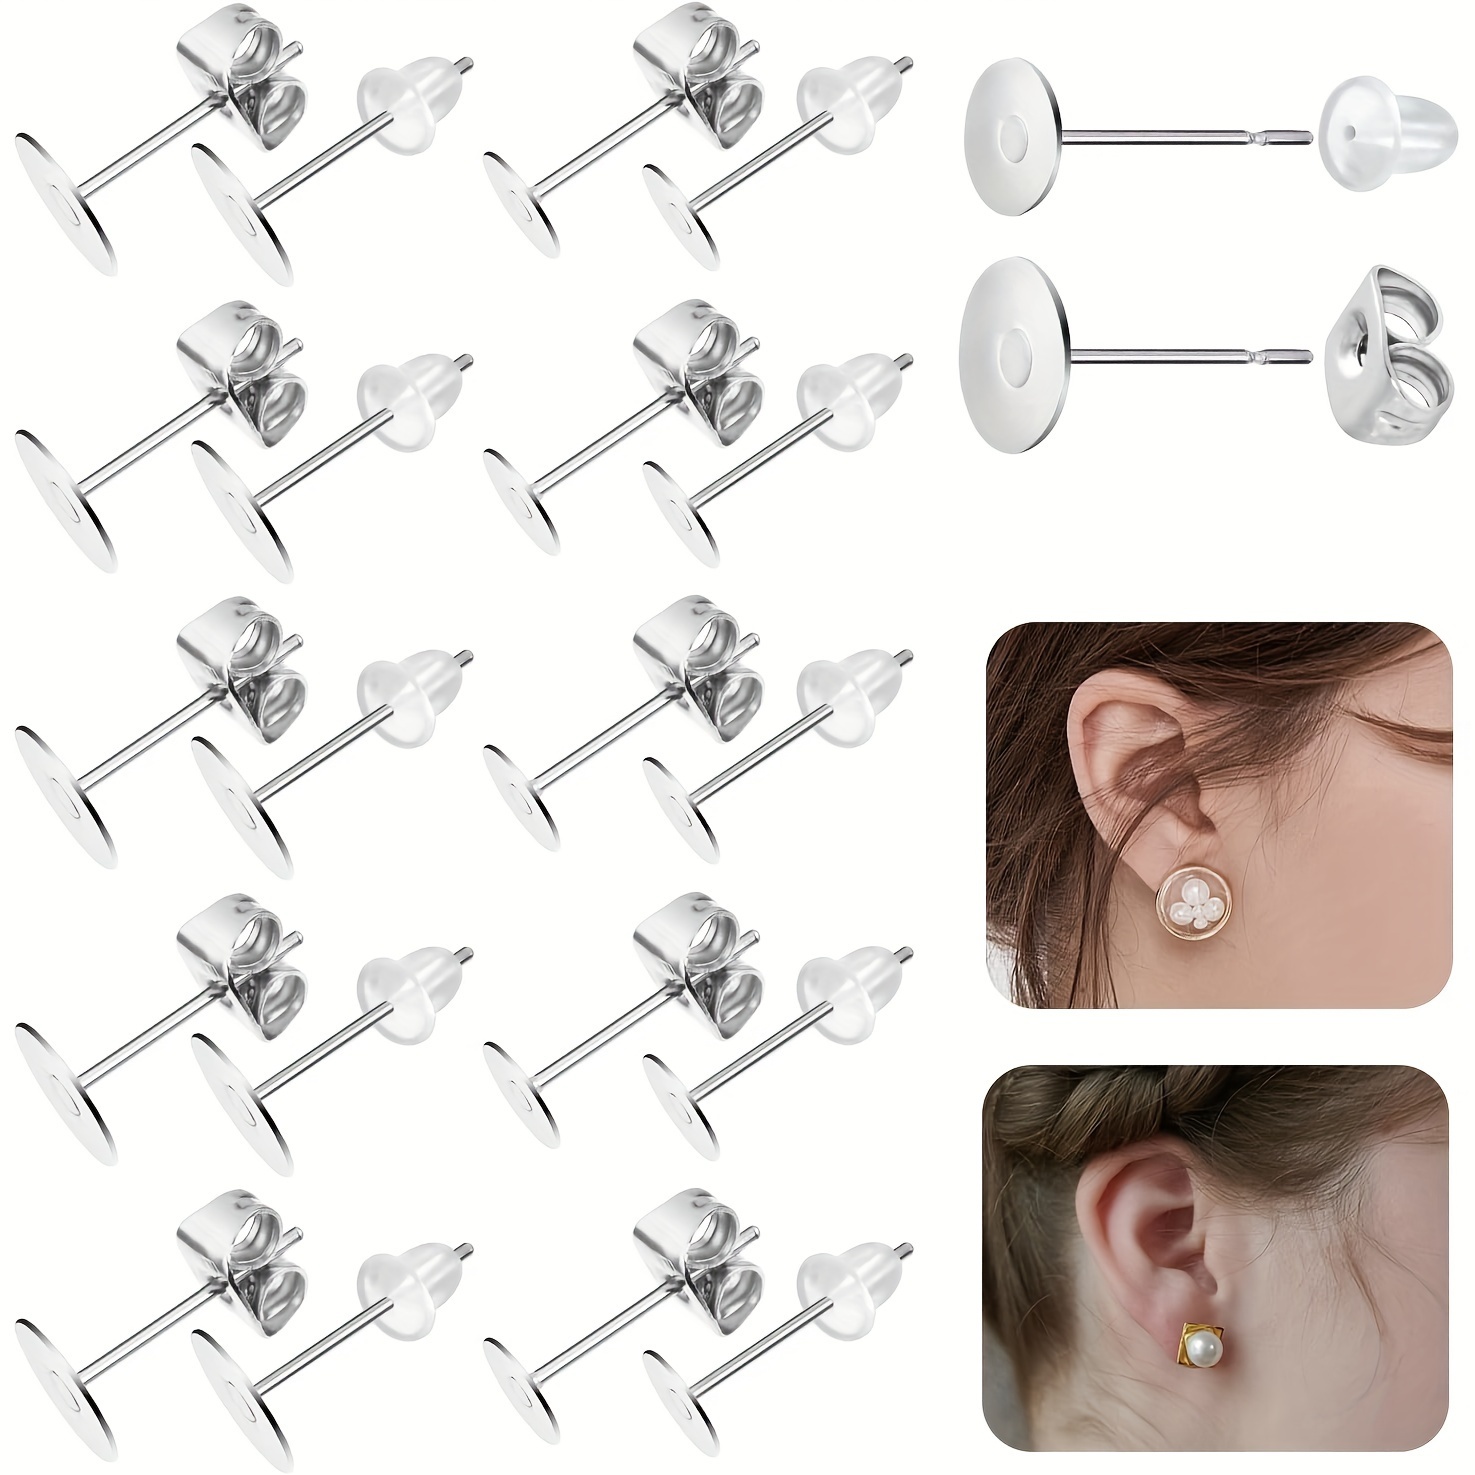 450PCS Gold Earring Posts and Backs,Hypoallergenic Earring Studs